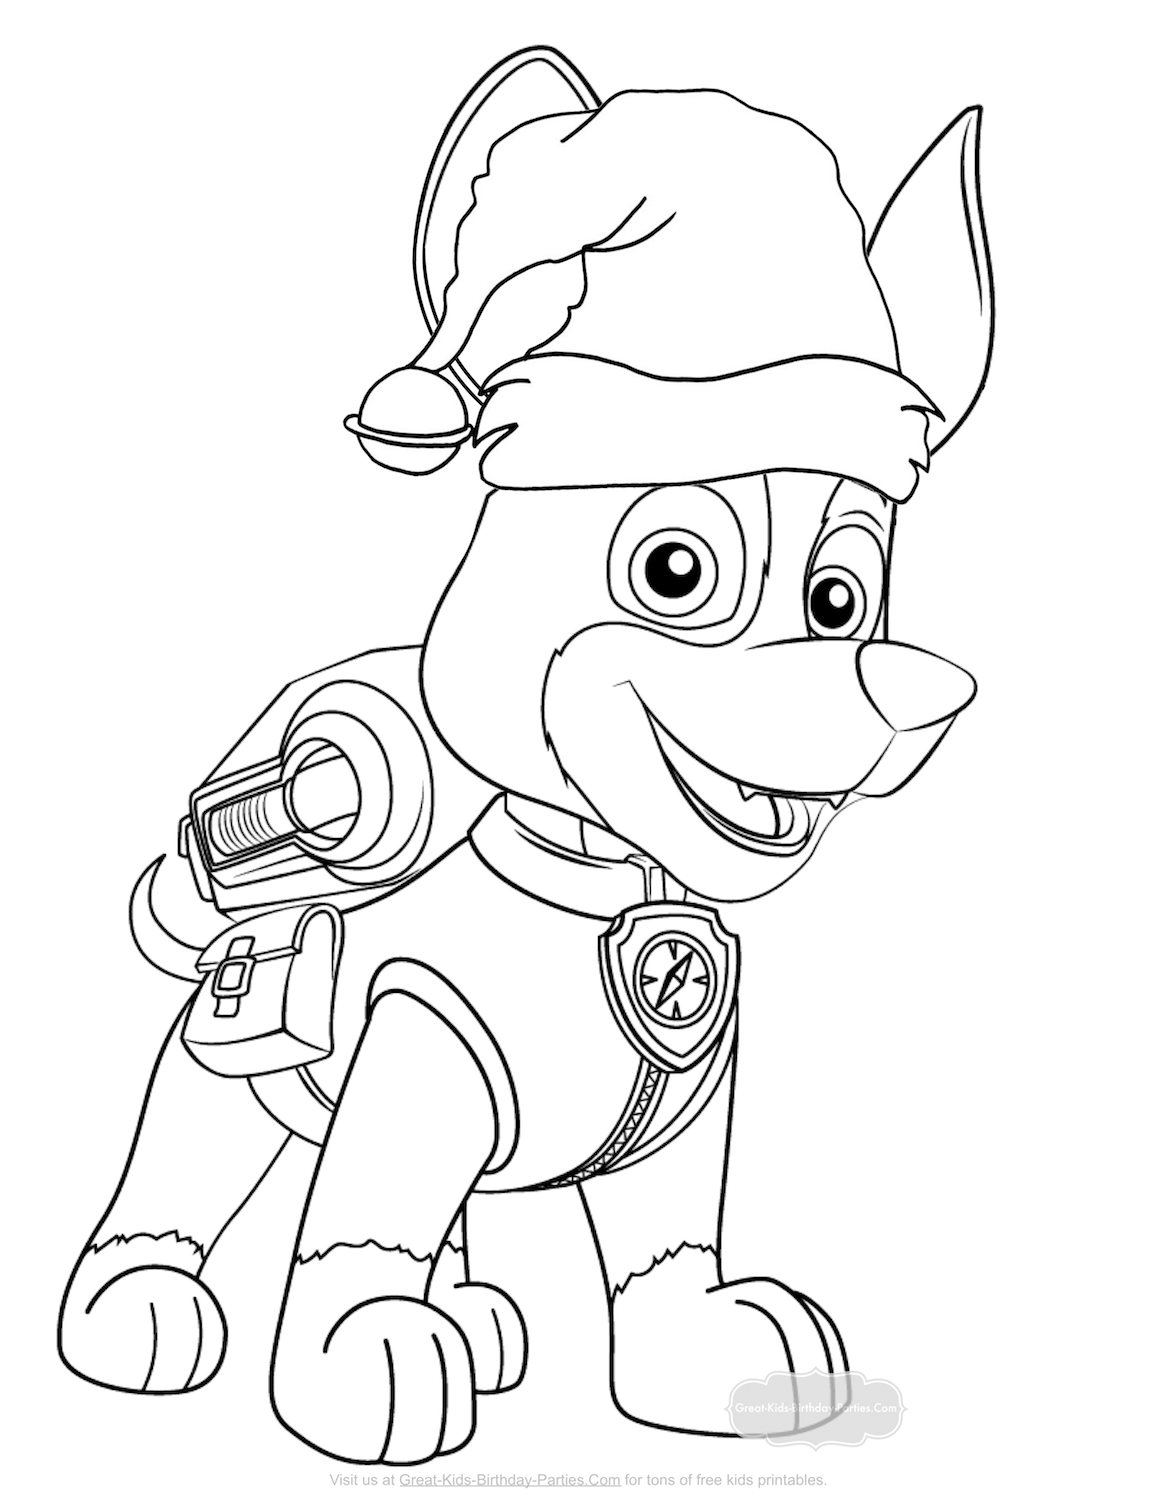 Get Paw Patrol Christmas Coloring Pages Gif – Tunnel To Viaduct Run